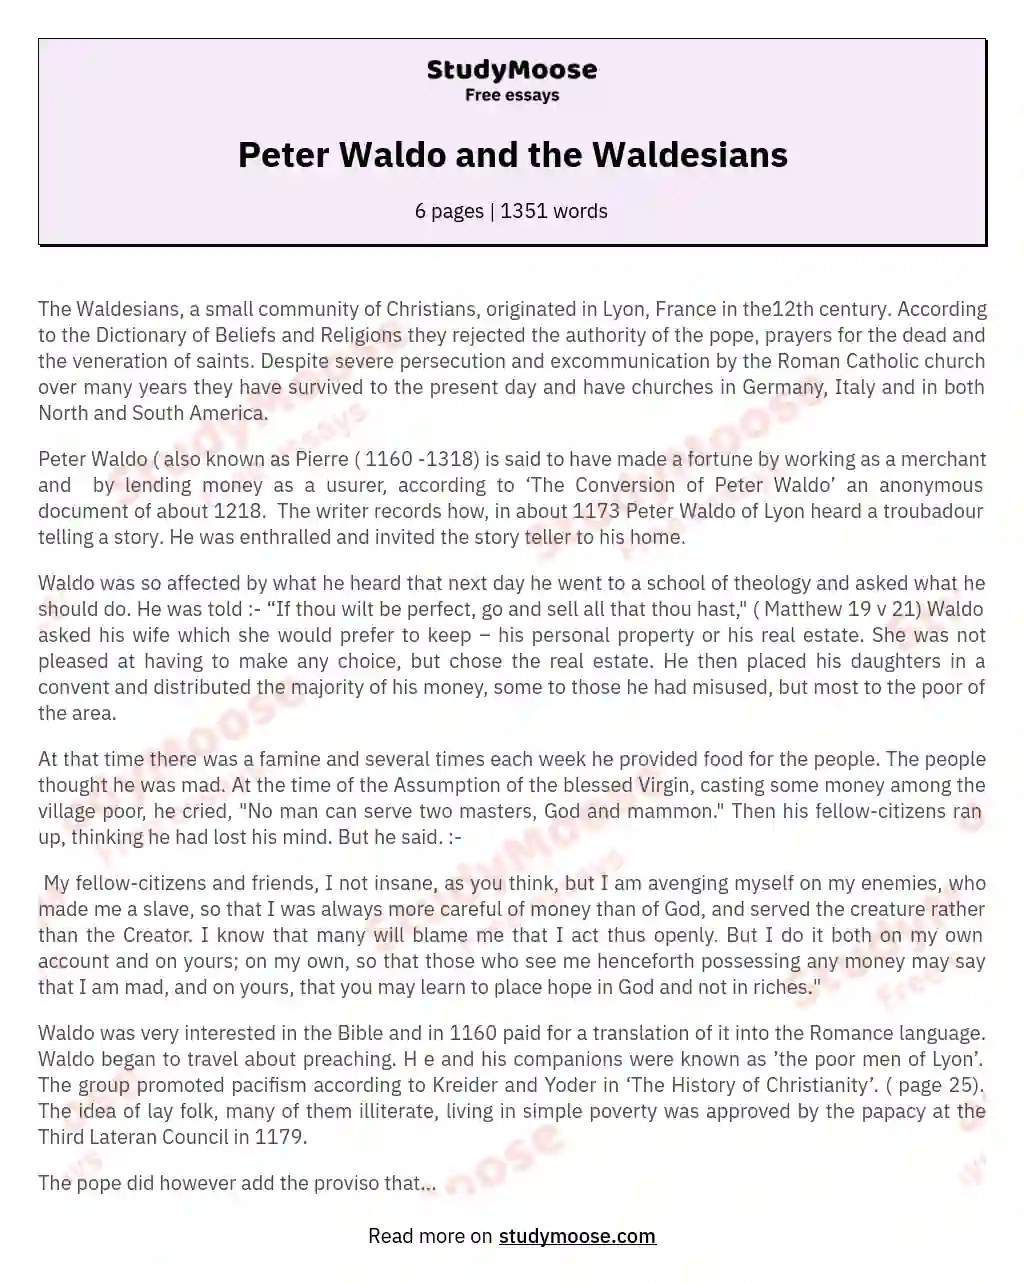 Peter Waldo and the Waldesians essay